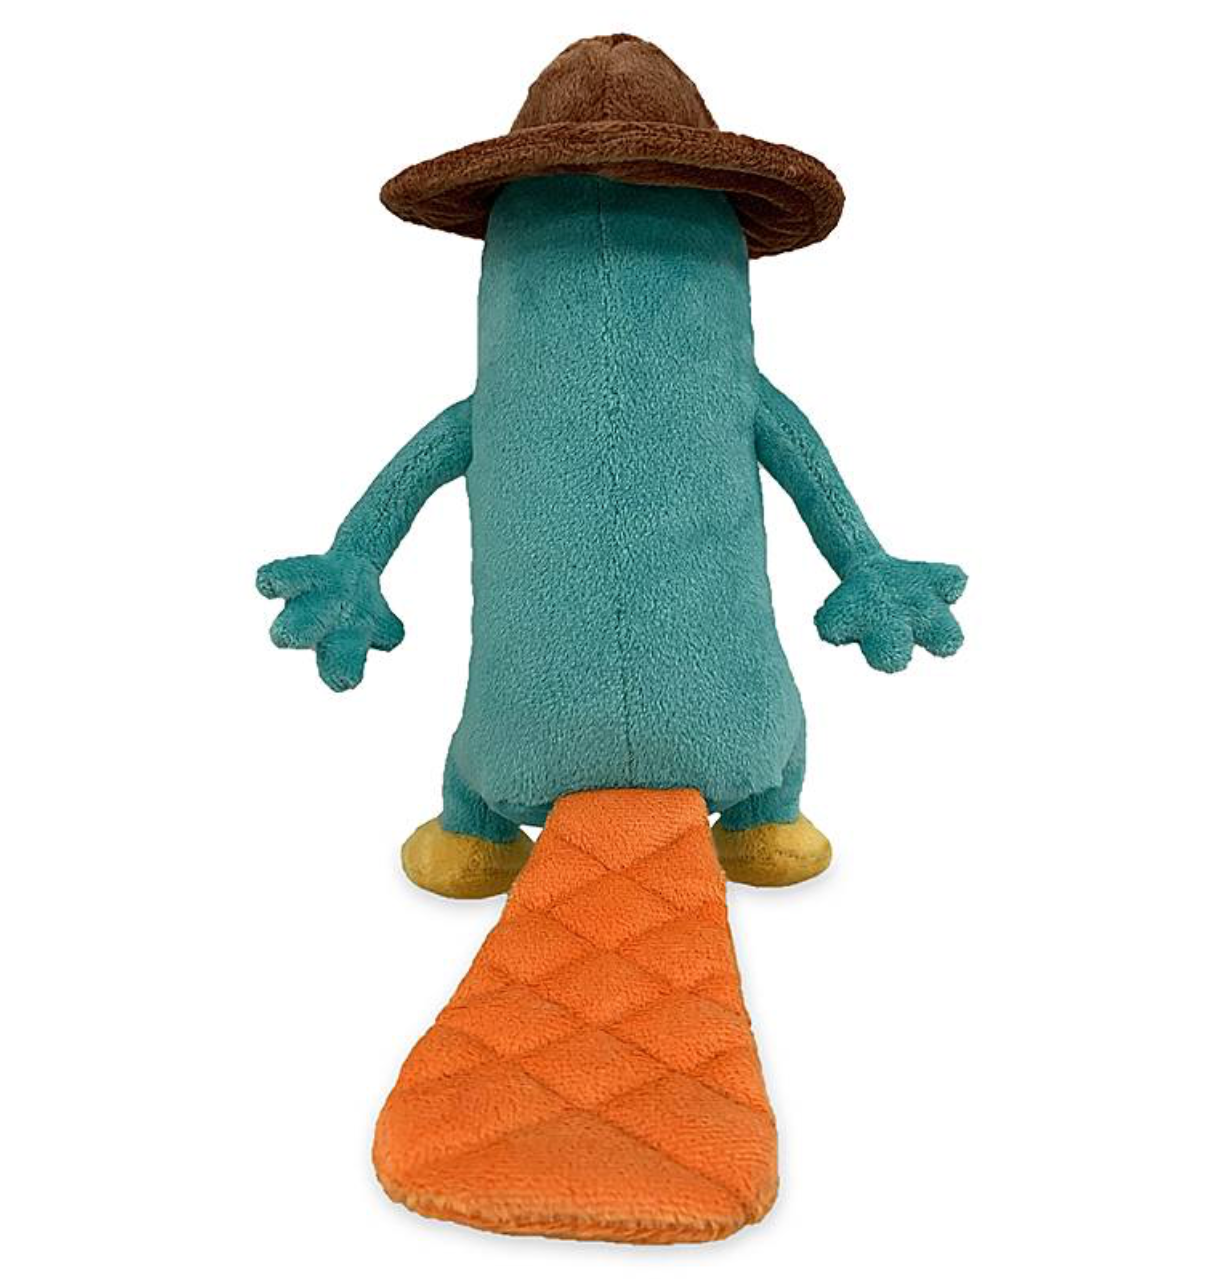 Disney Agent P Plush Phineas and Ferb Small New with Tag